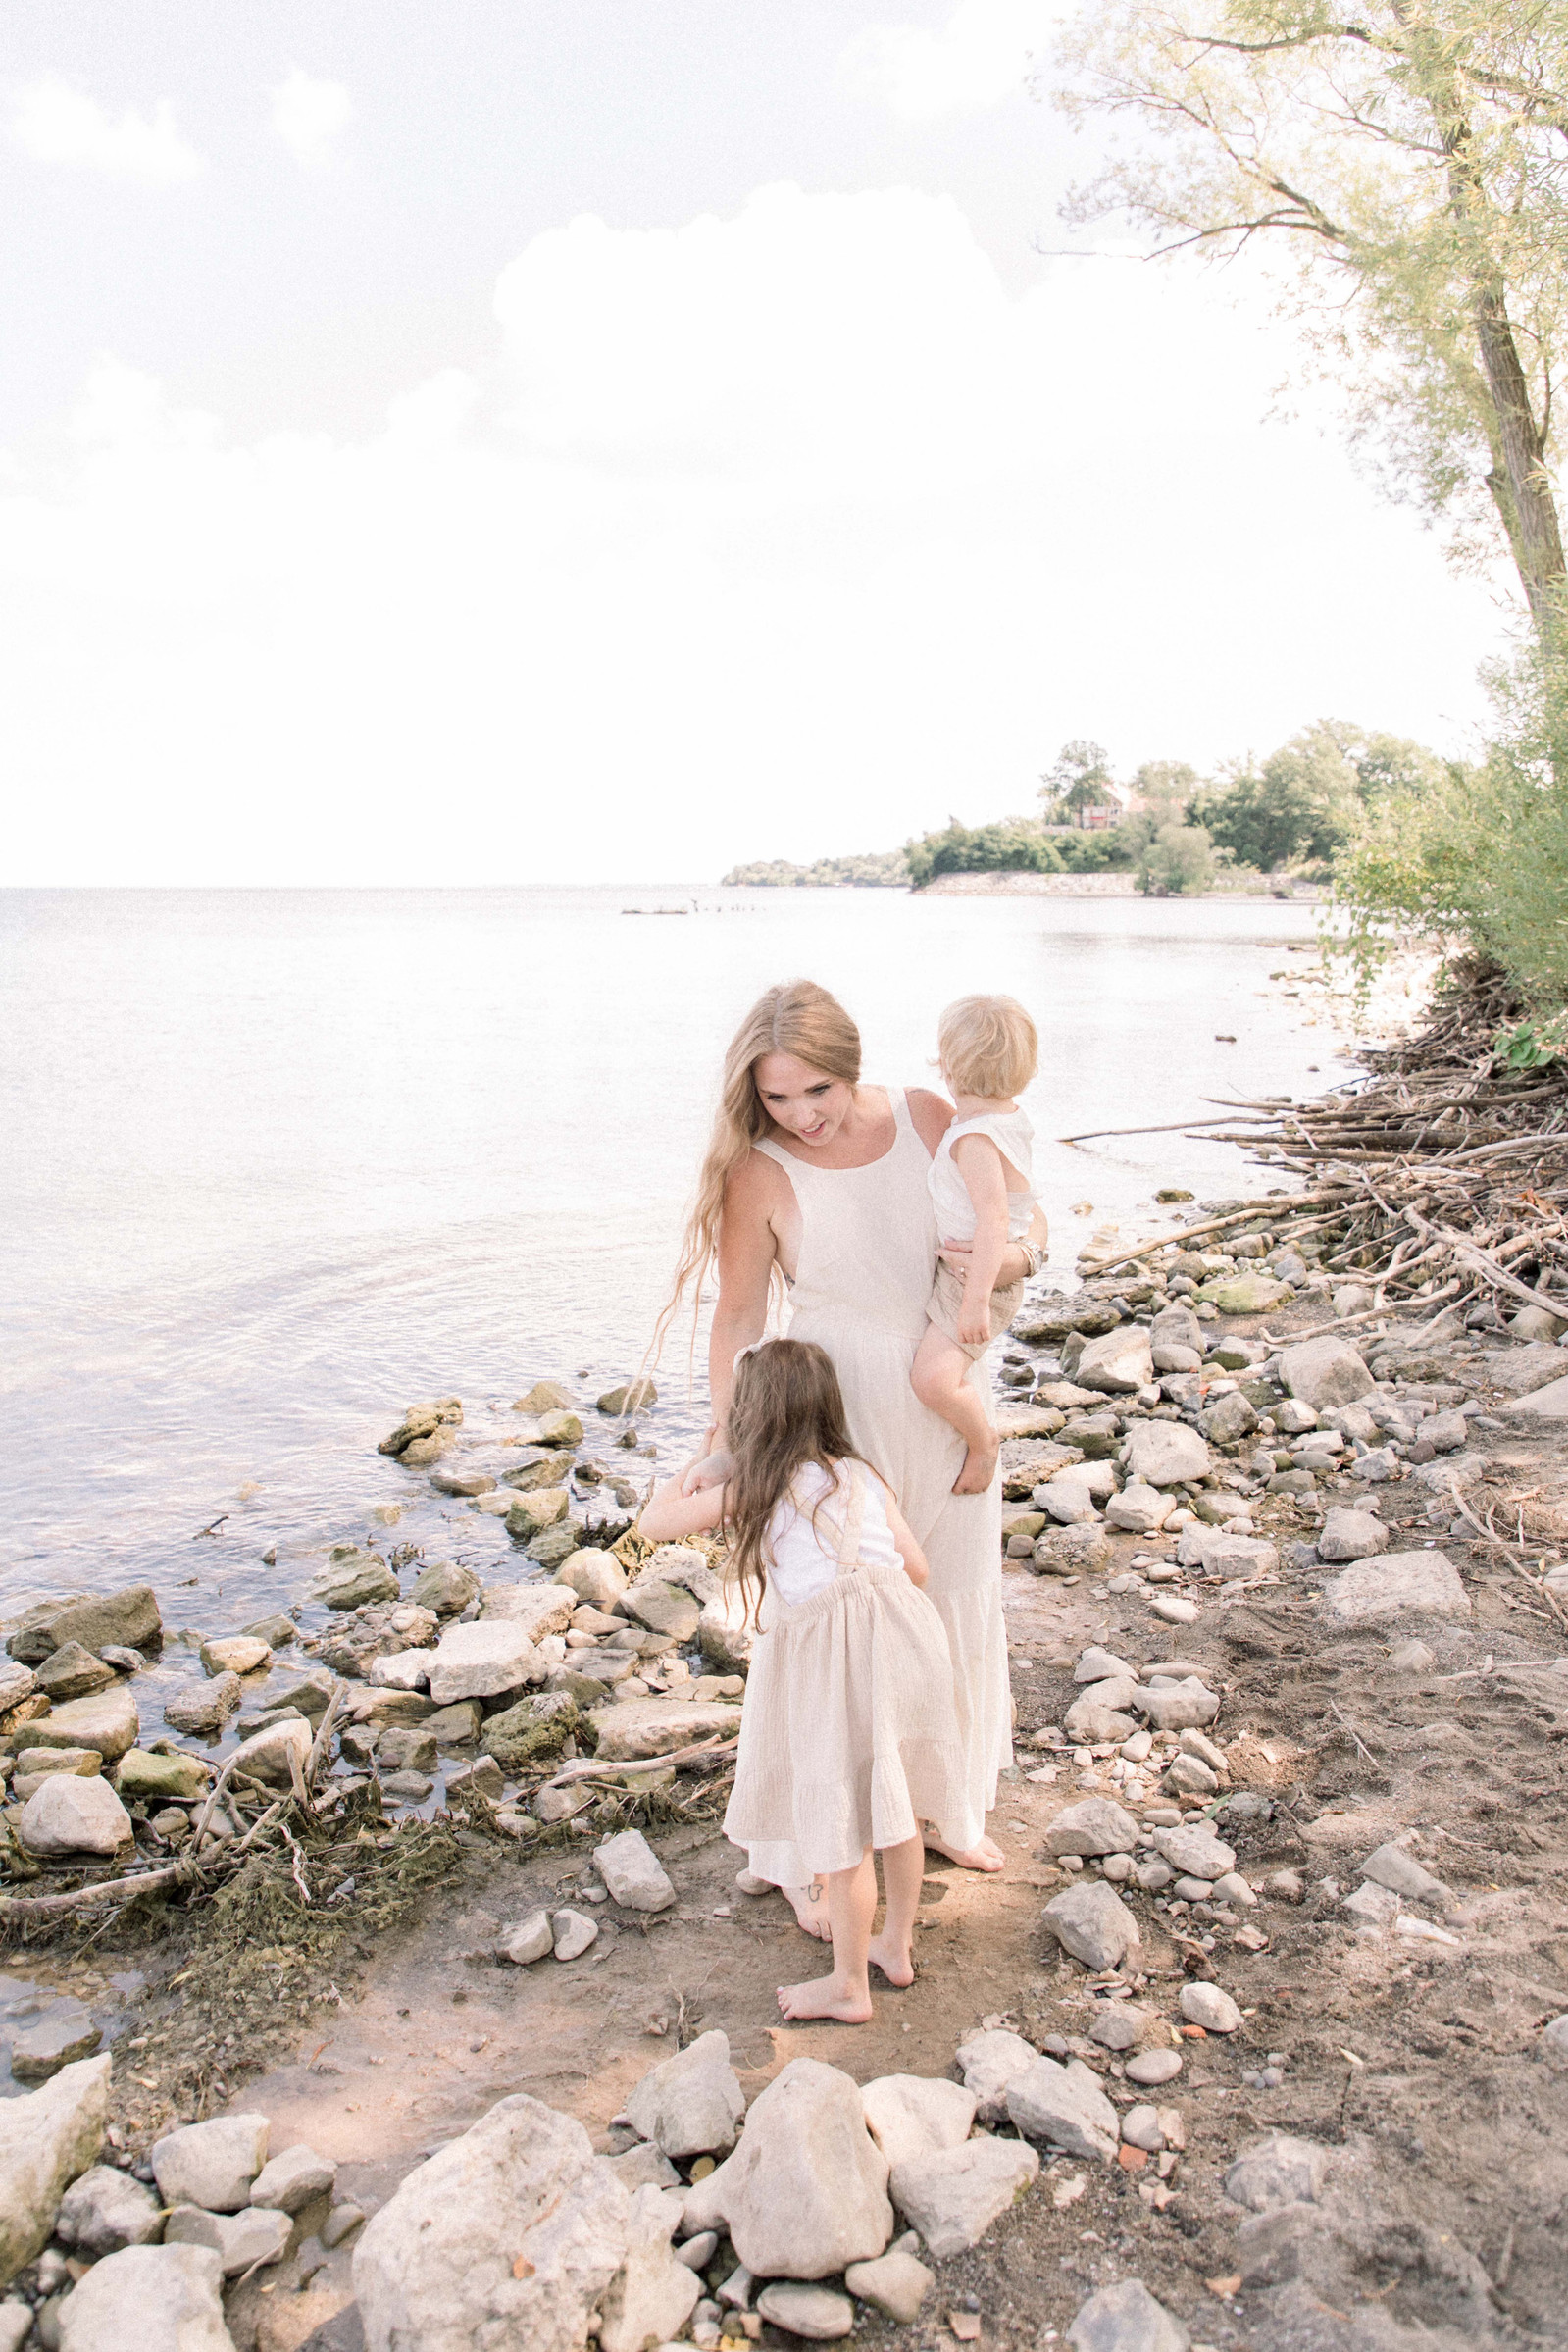 Portrait of mother with two small children standing together at the beach. Niagara family photographer, Niagara portrait photographer, Niagara motherhood photographer, candid photography, light & airy photography, Emily VanderBeek Photography.